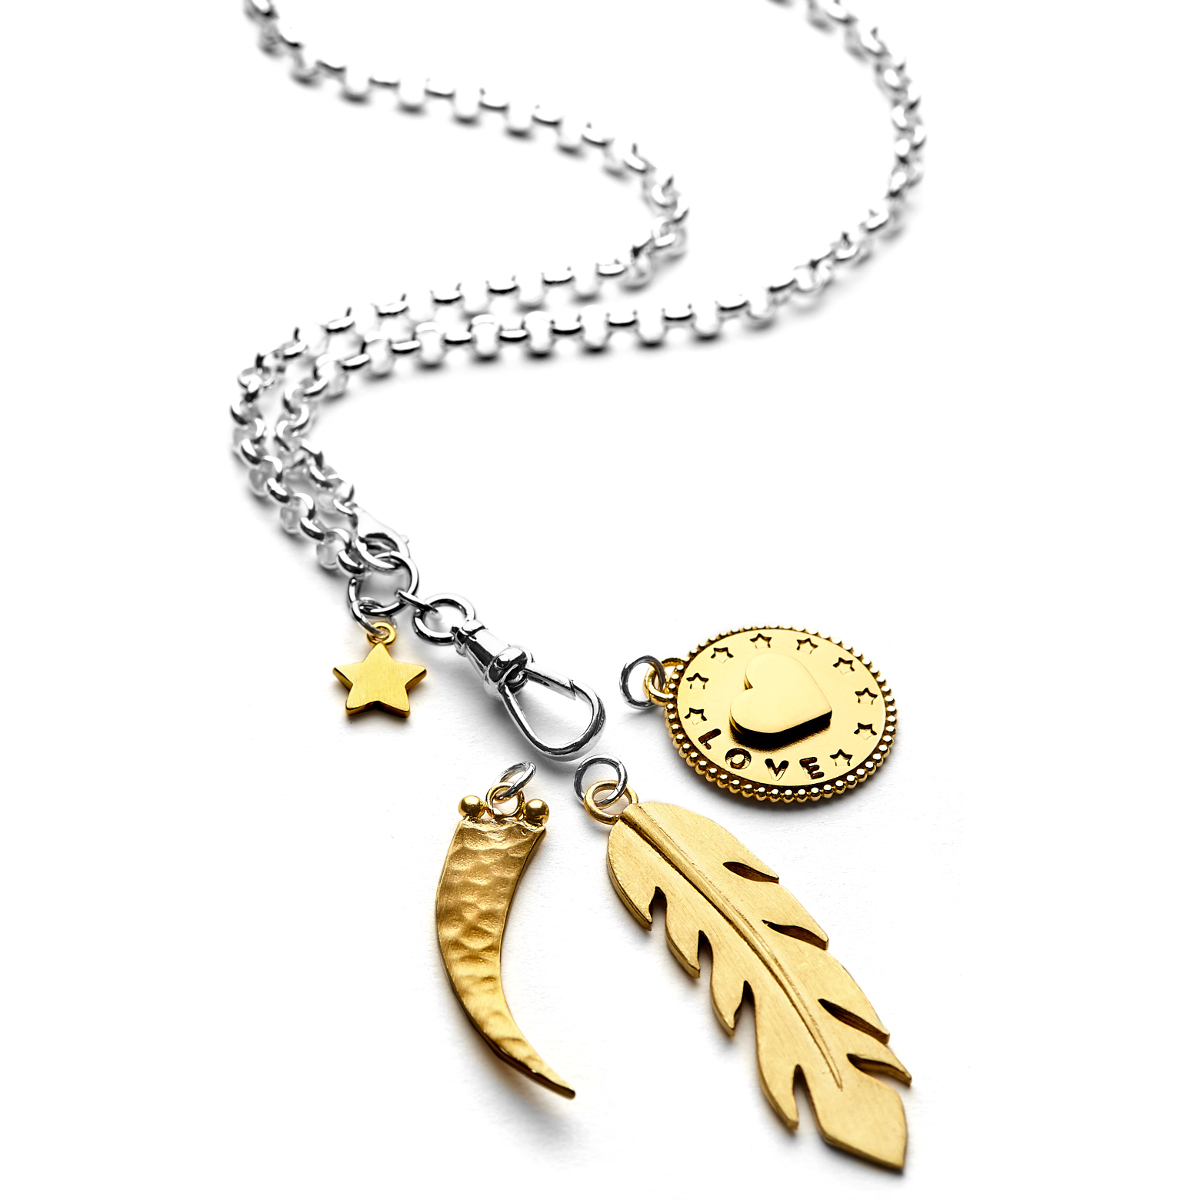 sterling silver and gold plate charm necklace